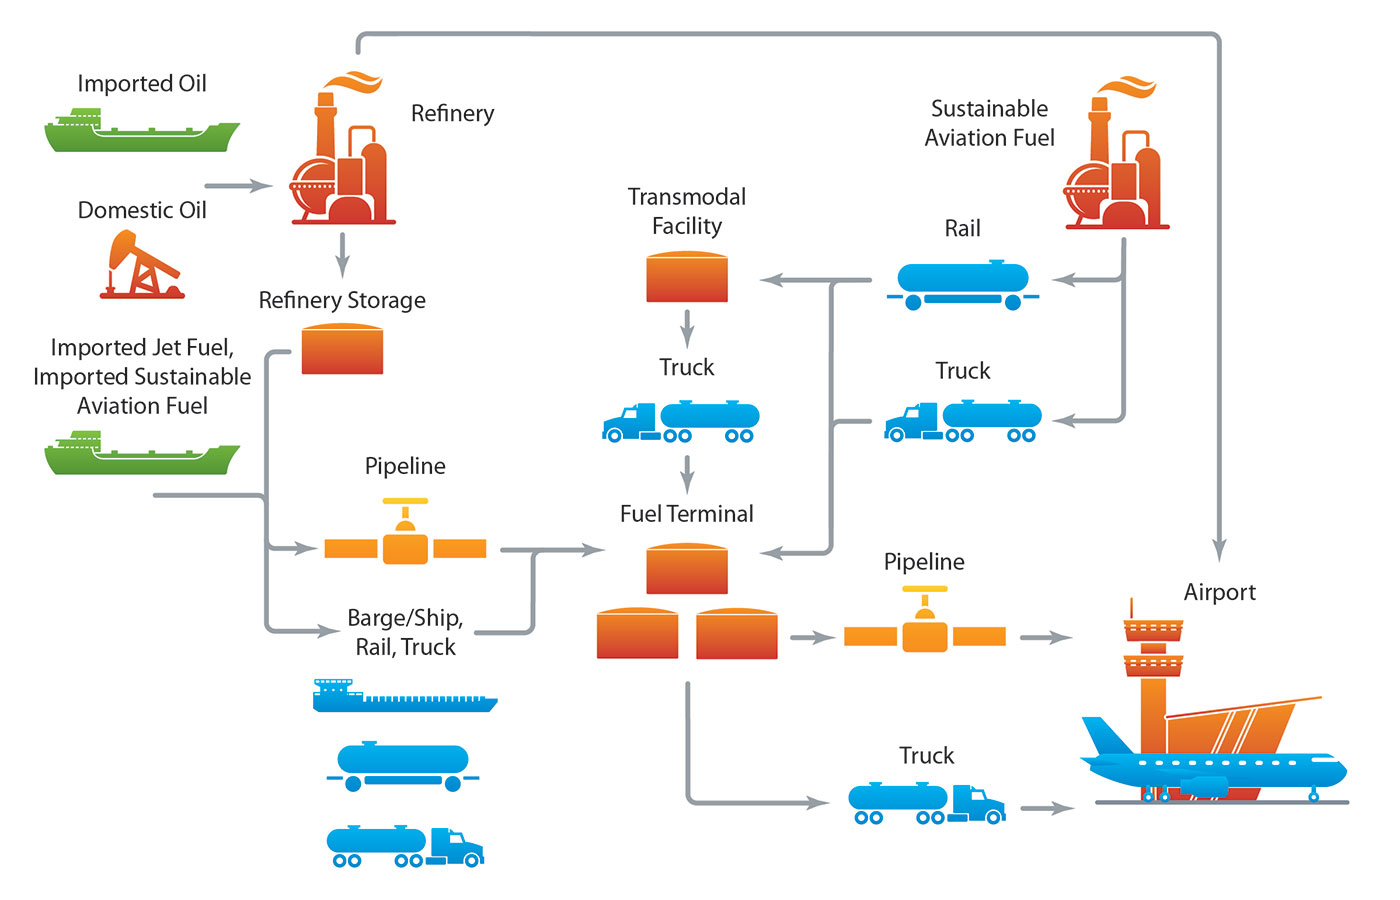 Diagram of an airport fuel supply chain. Imported oil and domestic oil go through a refinery and then to storage before passing through a pipeline or being transported by barge/ship, rail, or truck to a fuel terminal and then another pipeline or being transported by truck to an airport. In some cases, the oil refinery is located at the airport. For sustainable aviation fuel, the fuel is transported to a transmodal facility by rail or truck before being transported to a fuel terminal and then to the airport by pipeline or truck. Imported jet fuel and imported sustainable aviation fuel skip the refinery step but follow the rest of the pathway for oil.